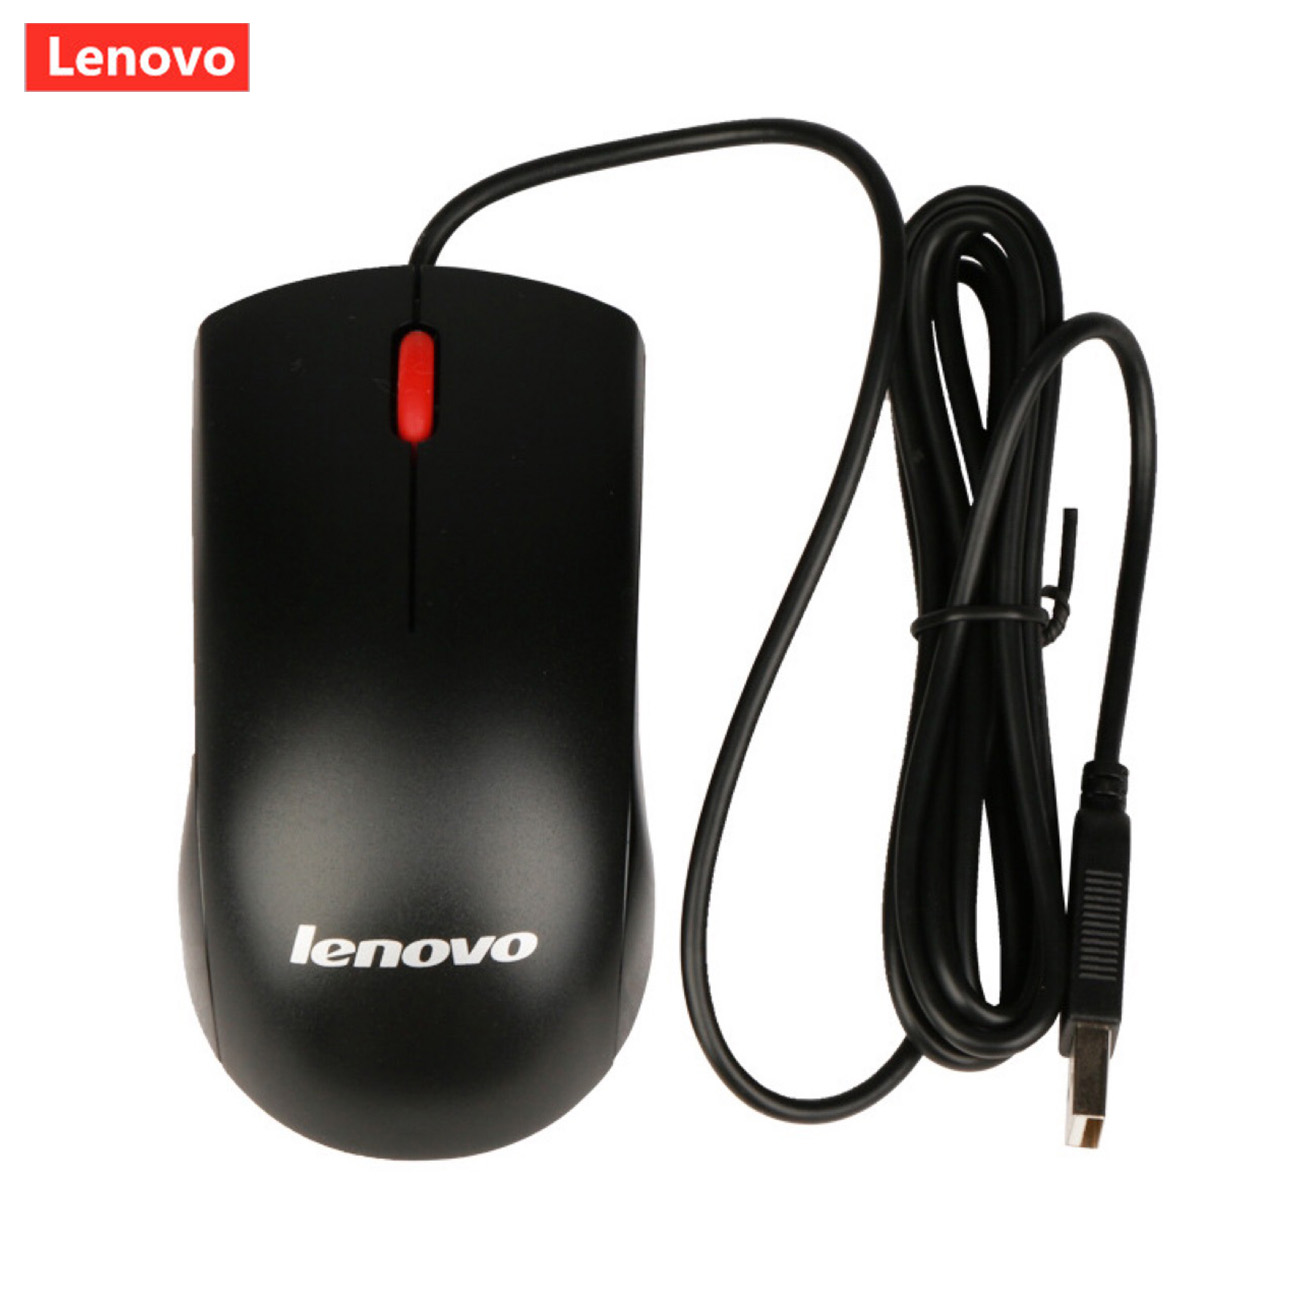 Lenovo M120 Wired Mouse